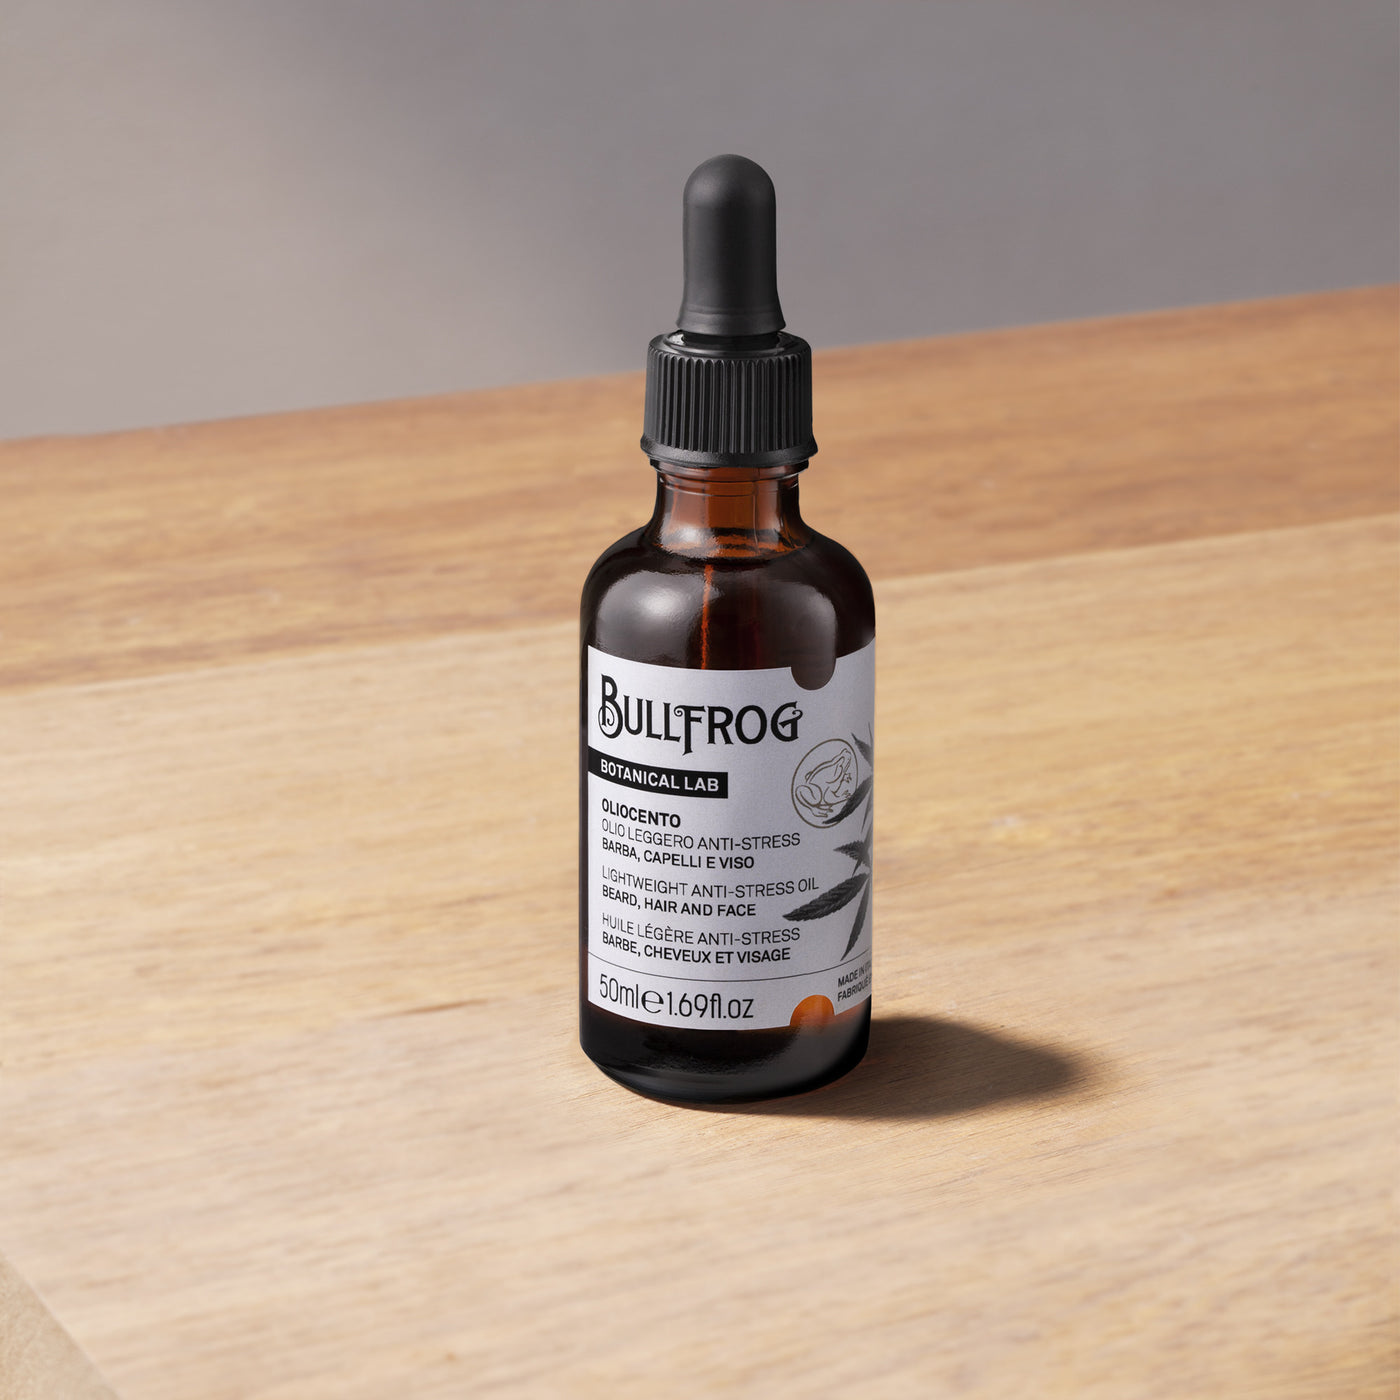 OLIOCENTO - LIGHTWEIGHT ANTI-STRESS OIL BEARD, HAIR AND FACE